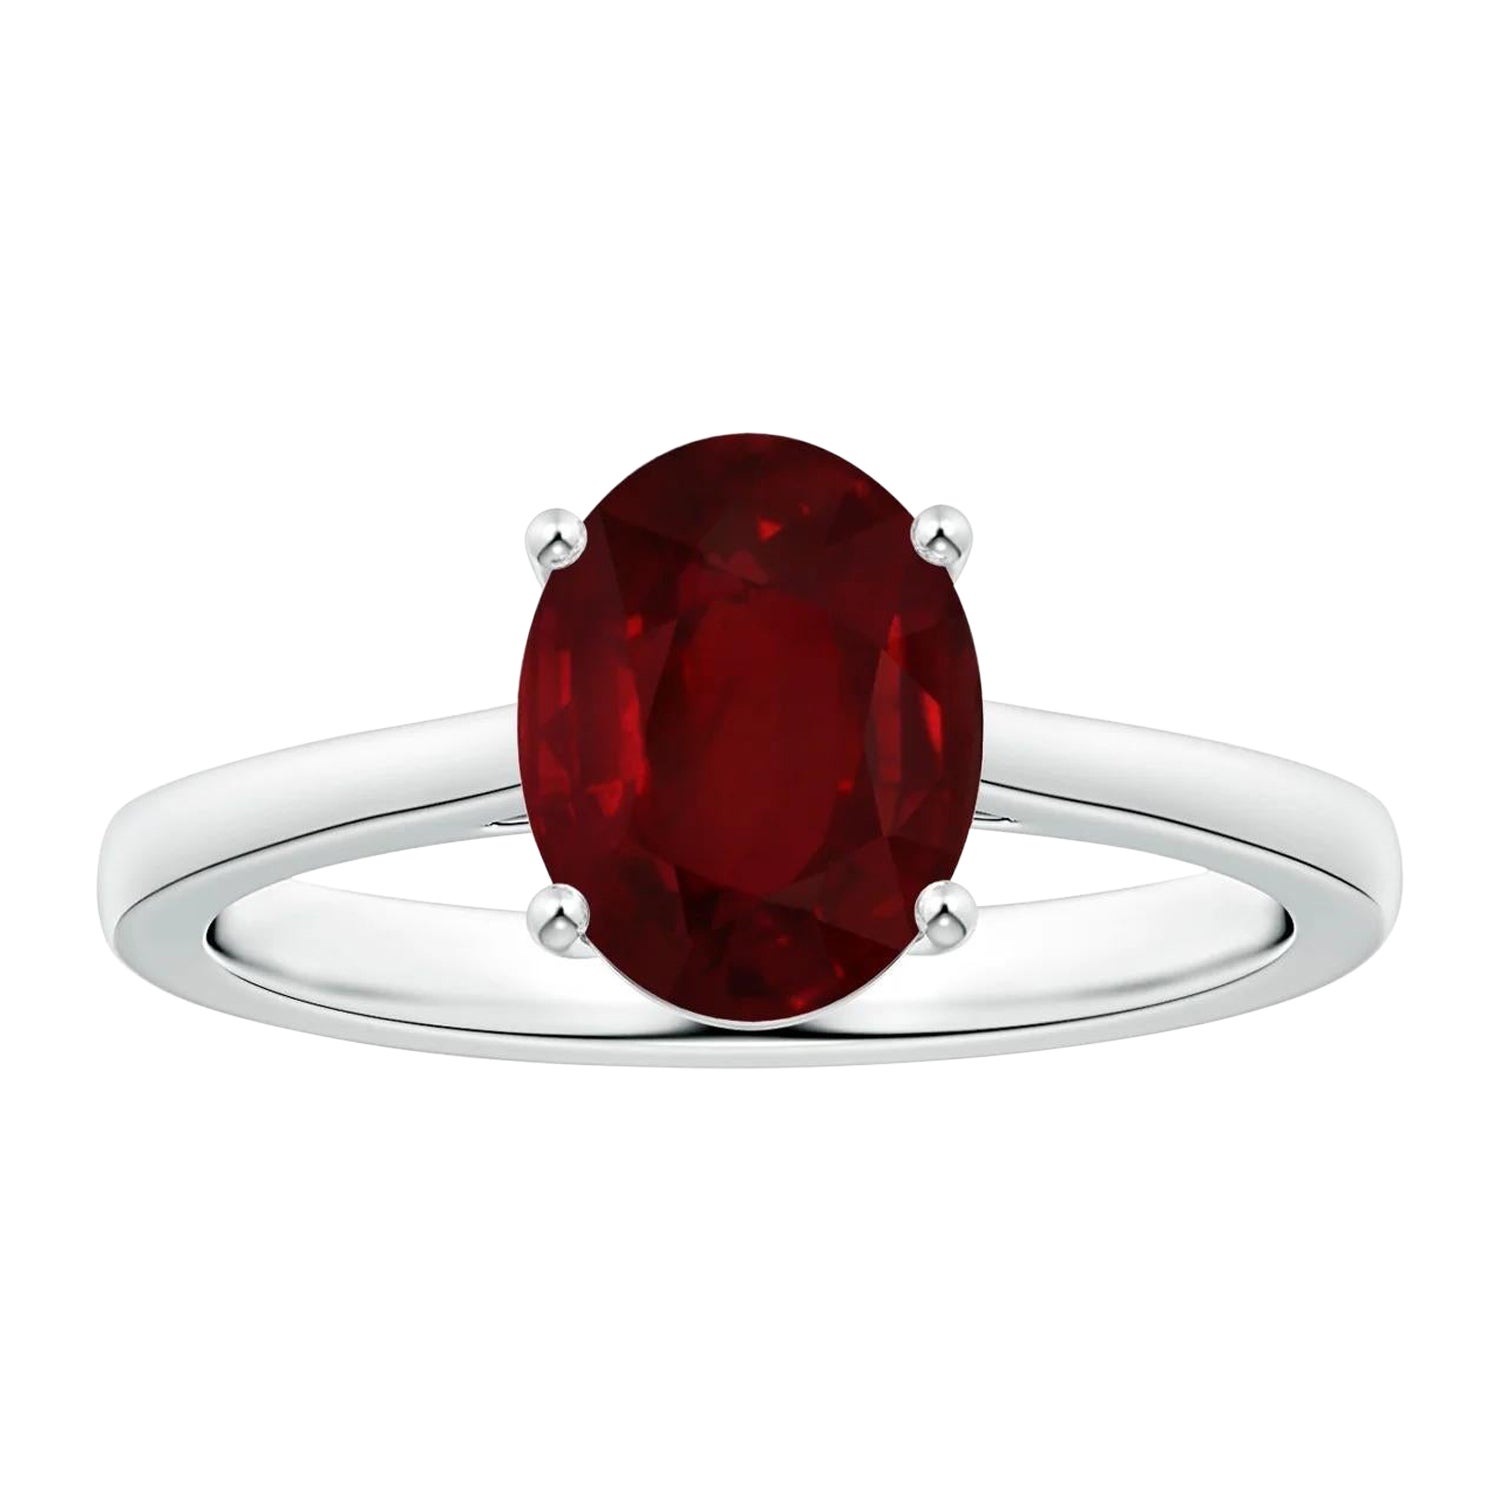 For Sale:  ANGARA GIA Certified Ruby Solitaire White Gold Ring with Reverse Tapered Shank